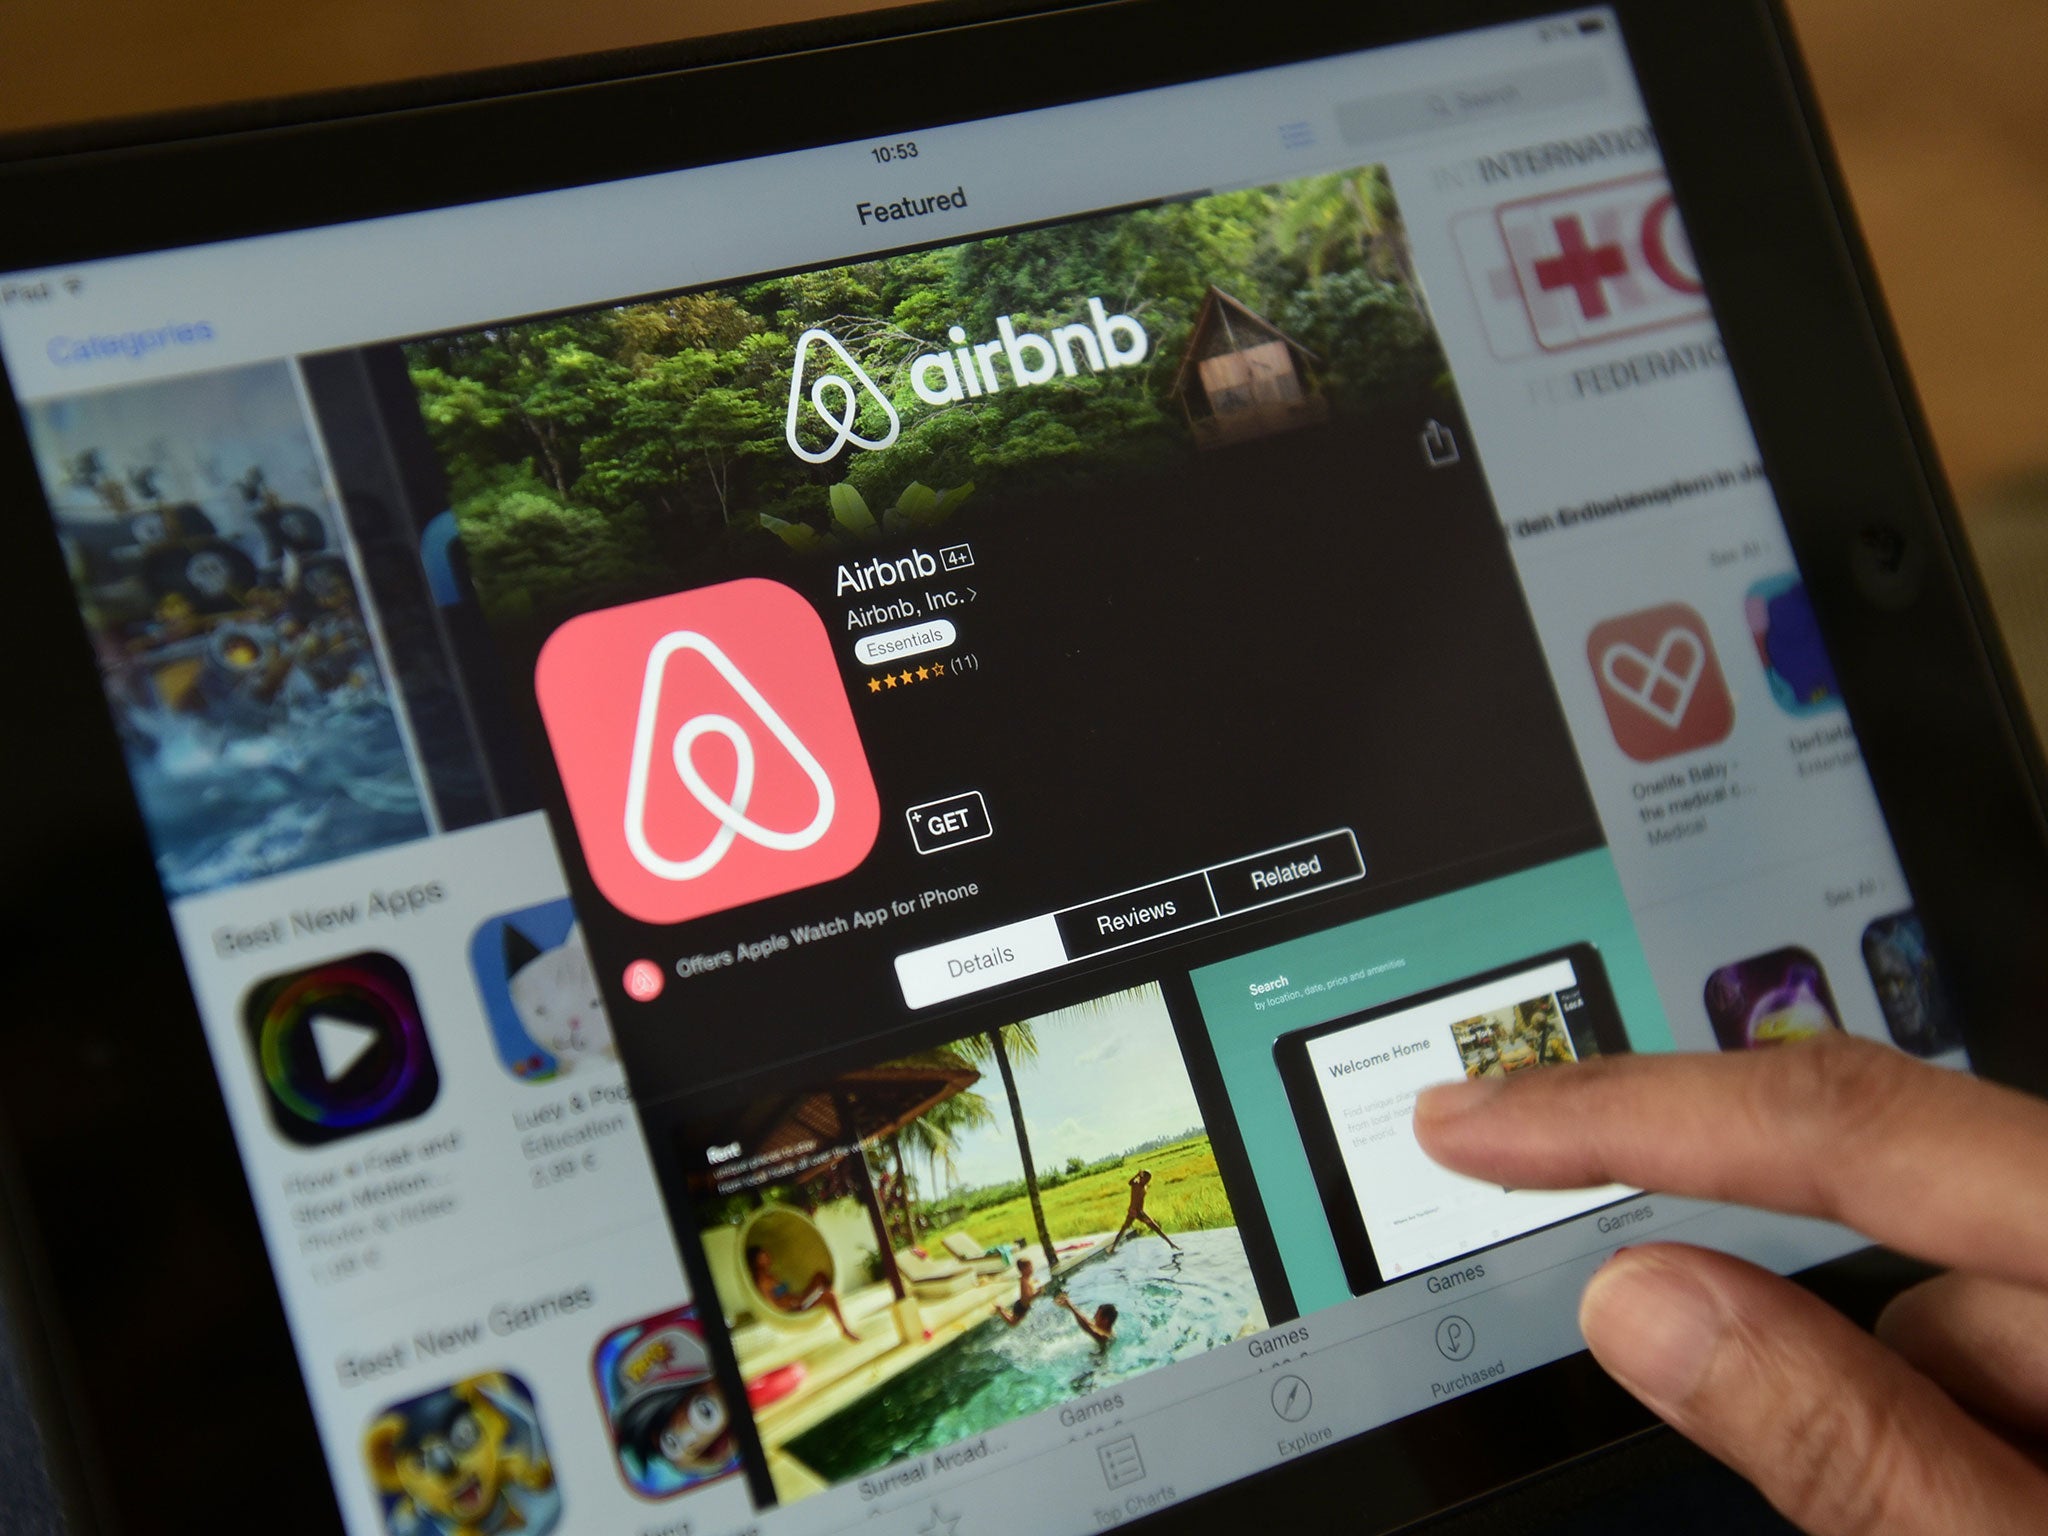 Airbnb said it penalised the host, who has been barred from taking any more bookings during the conference